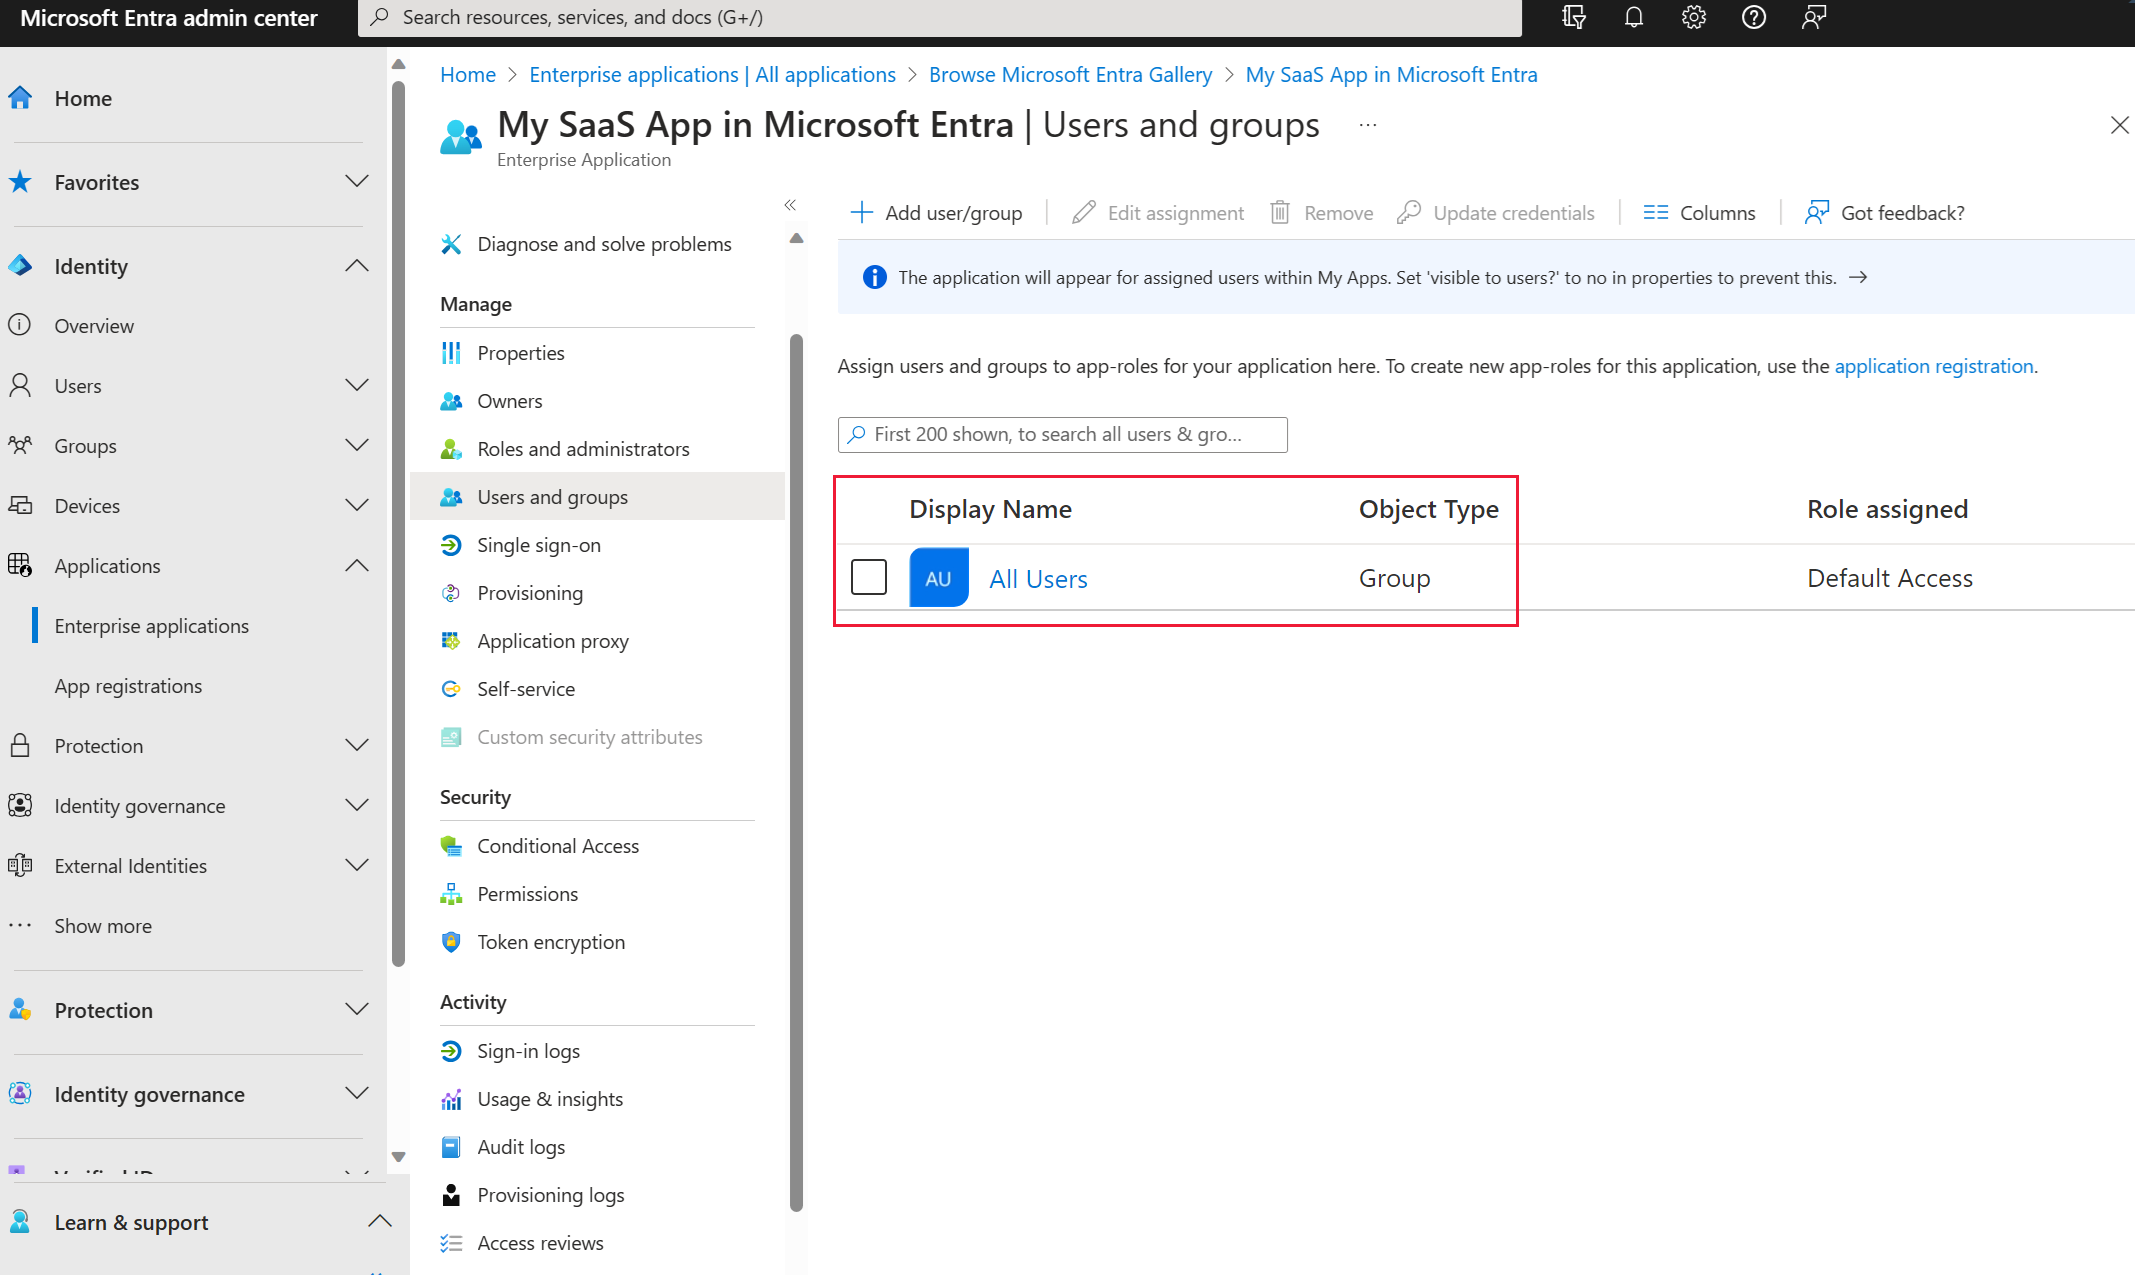 Screenshot shows My SaaS Apps in Microsoft Entra ID.